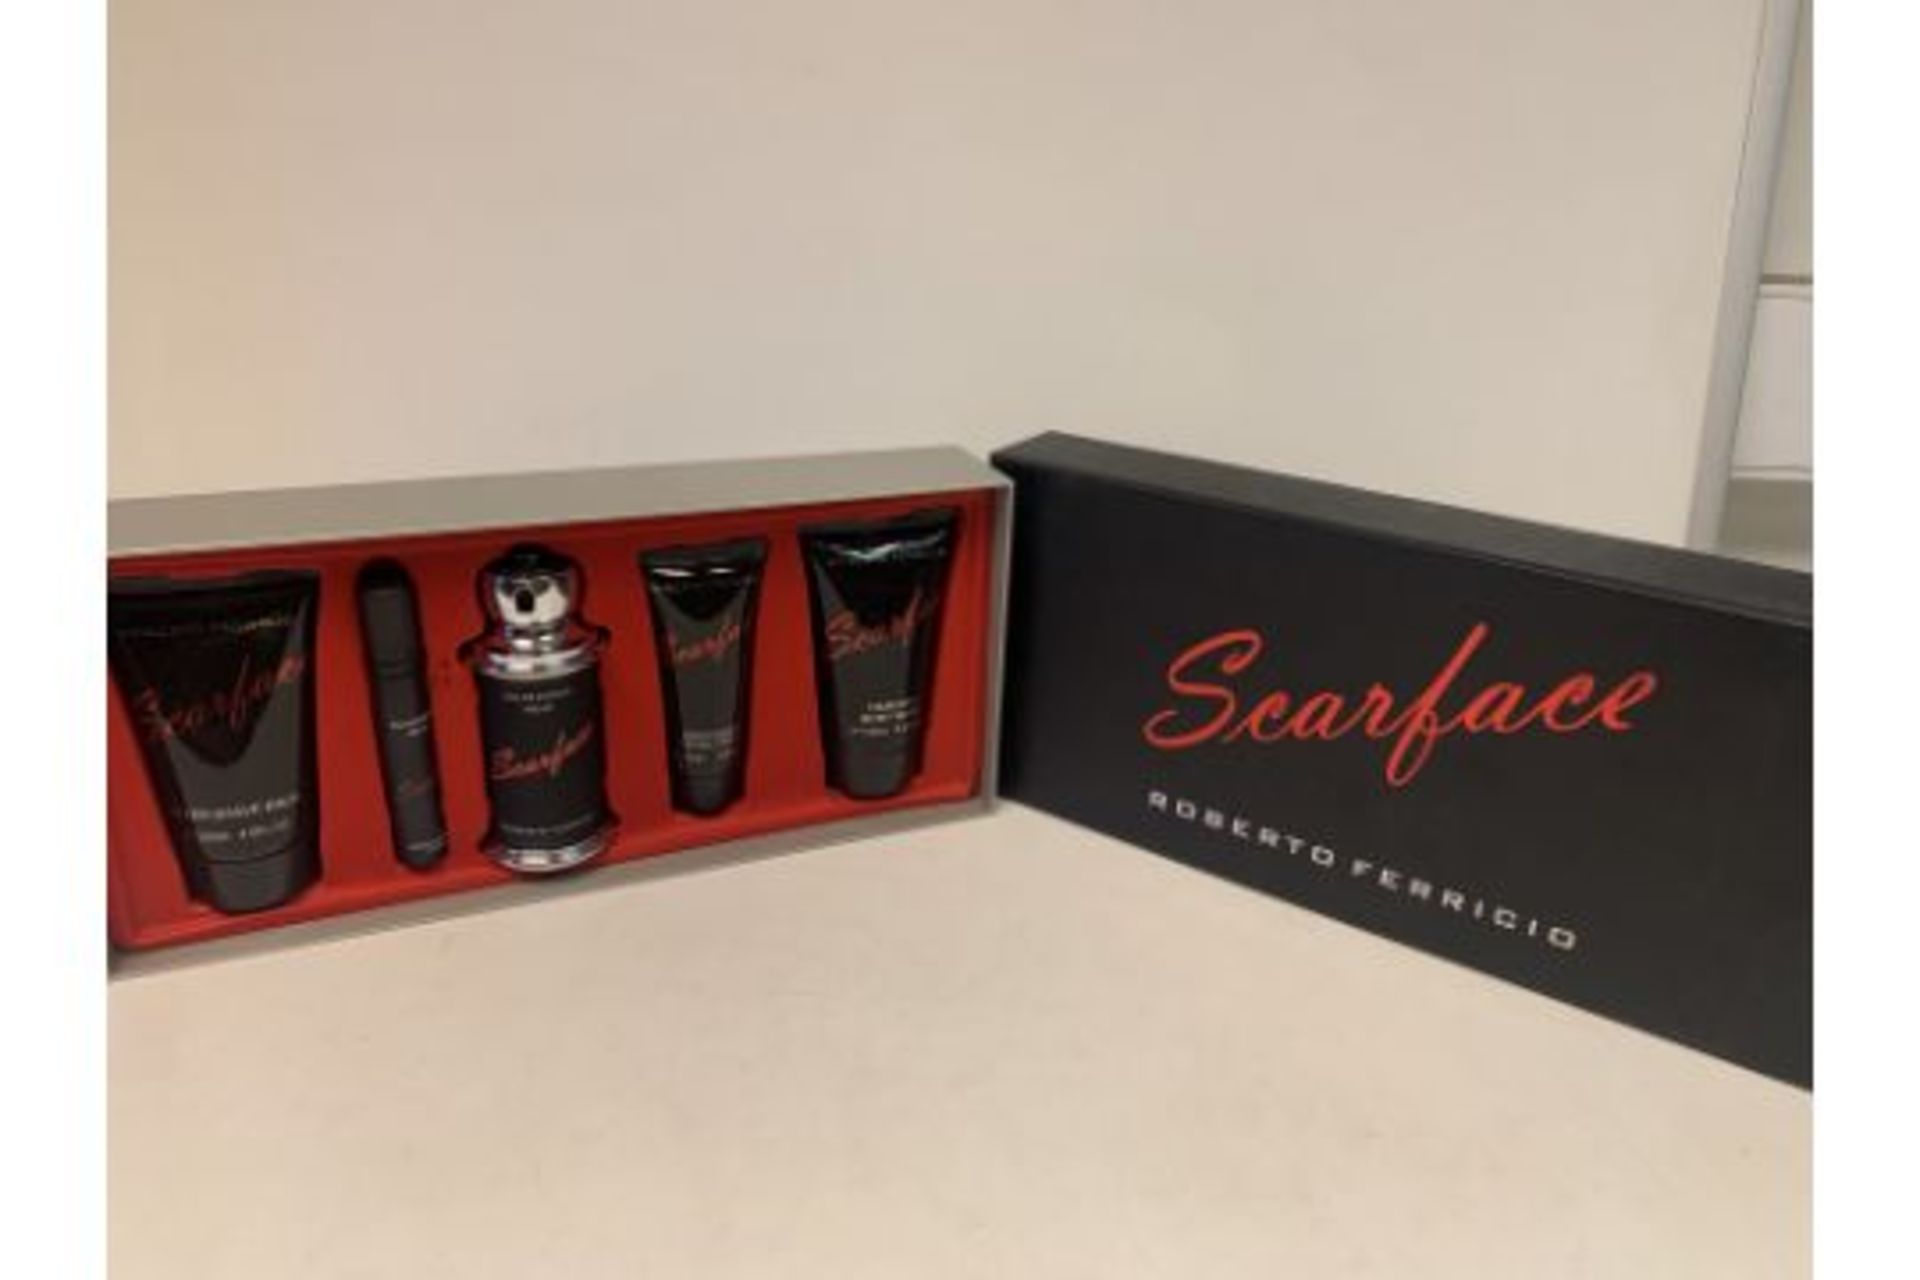 12 X BRAND NEW RETAIL BOXED ROBERTO FERRICIO SCARFACE GIFT SETS INCLUDING 120ML AFTERSHAVE BALM,